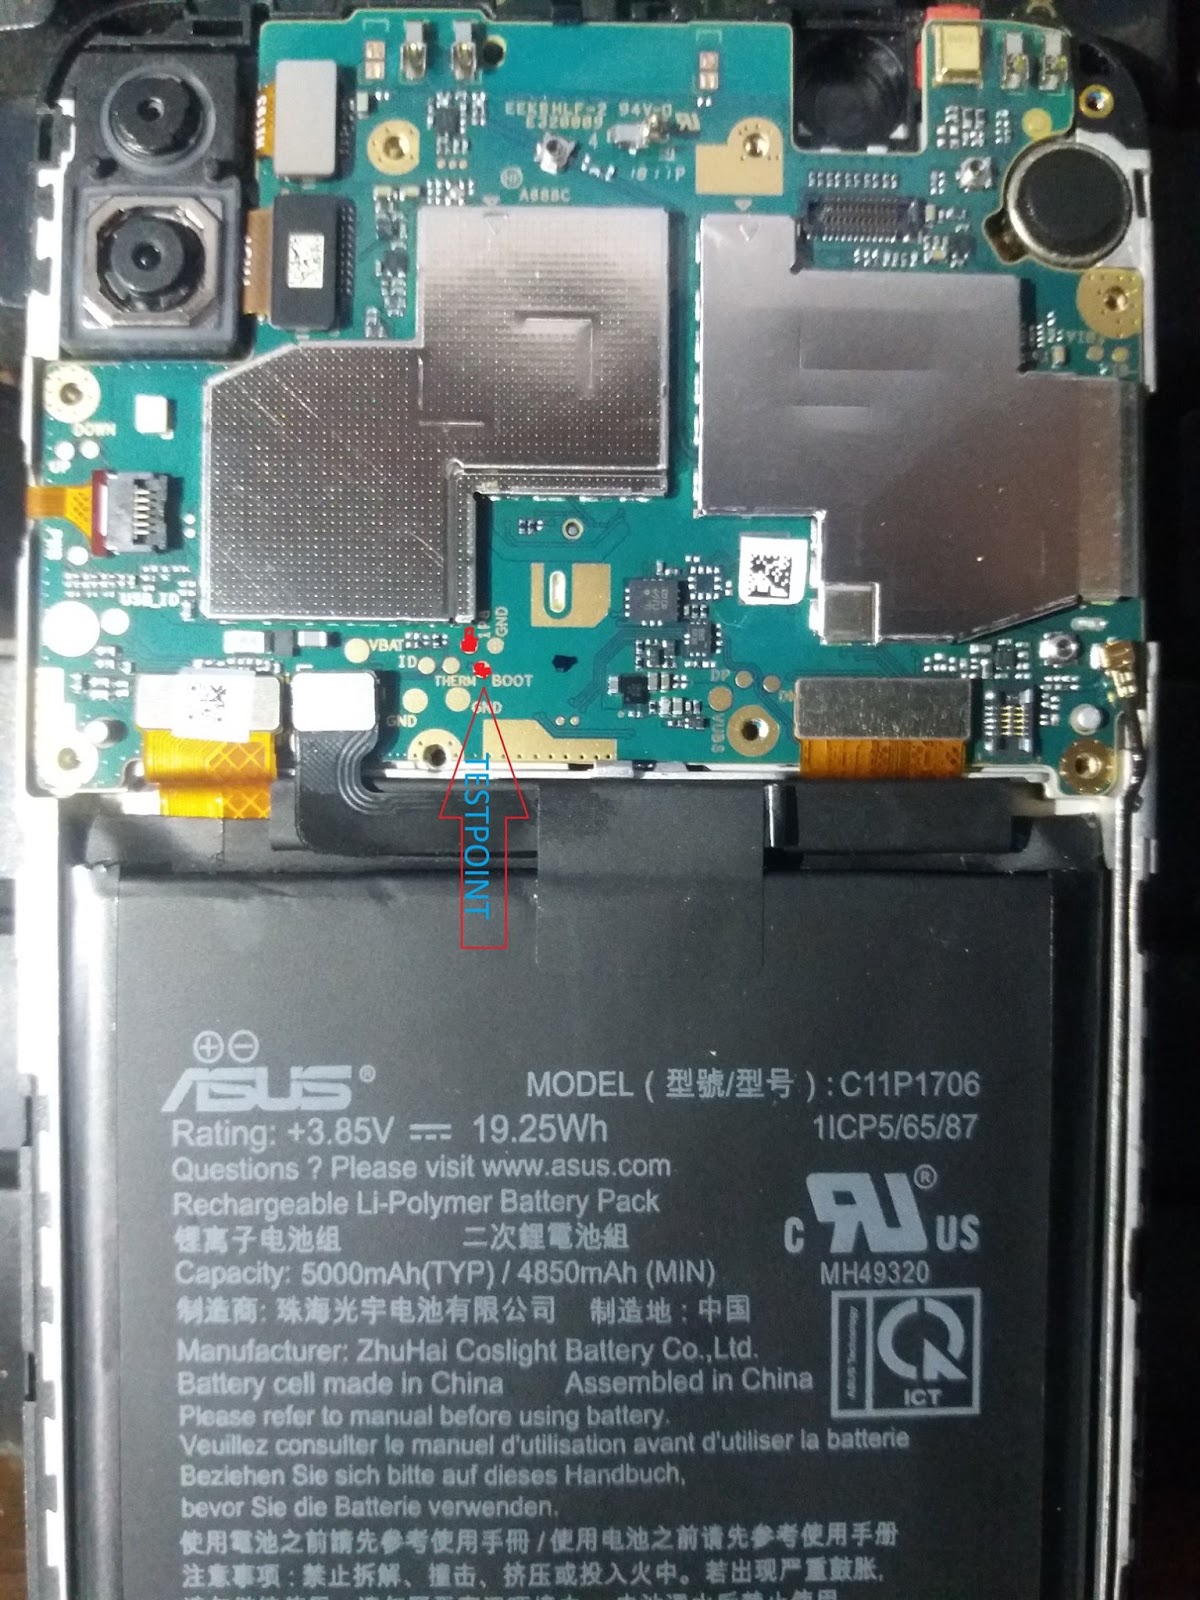 Asus Zenfone Max Pro Edl Point Gadget To Review